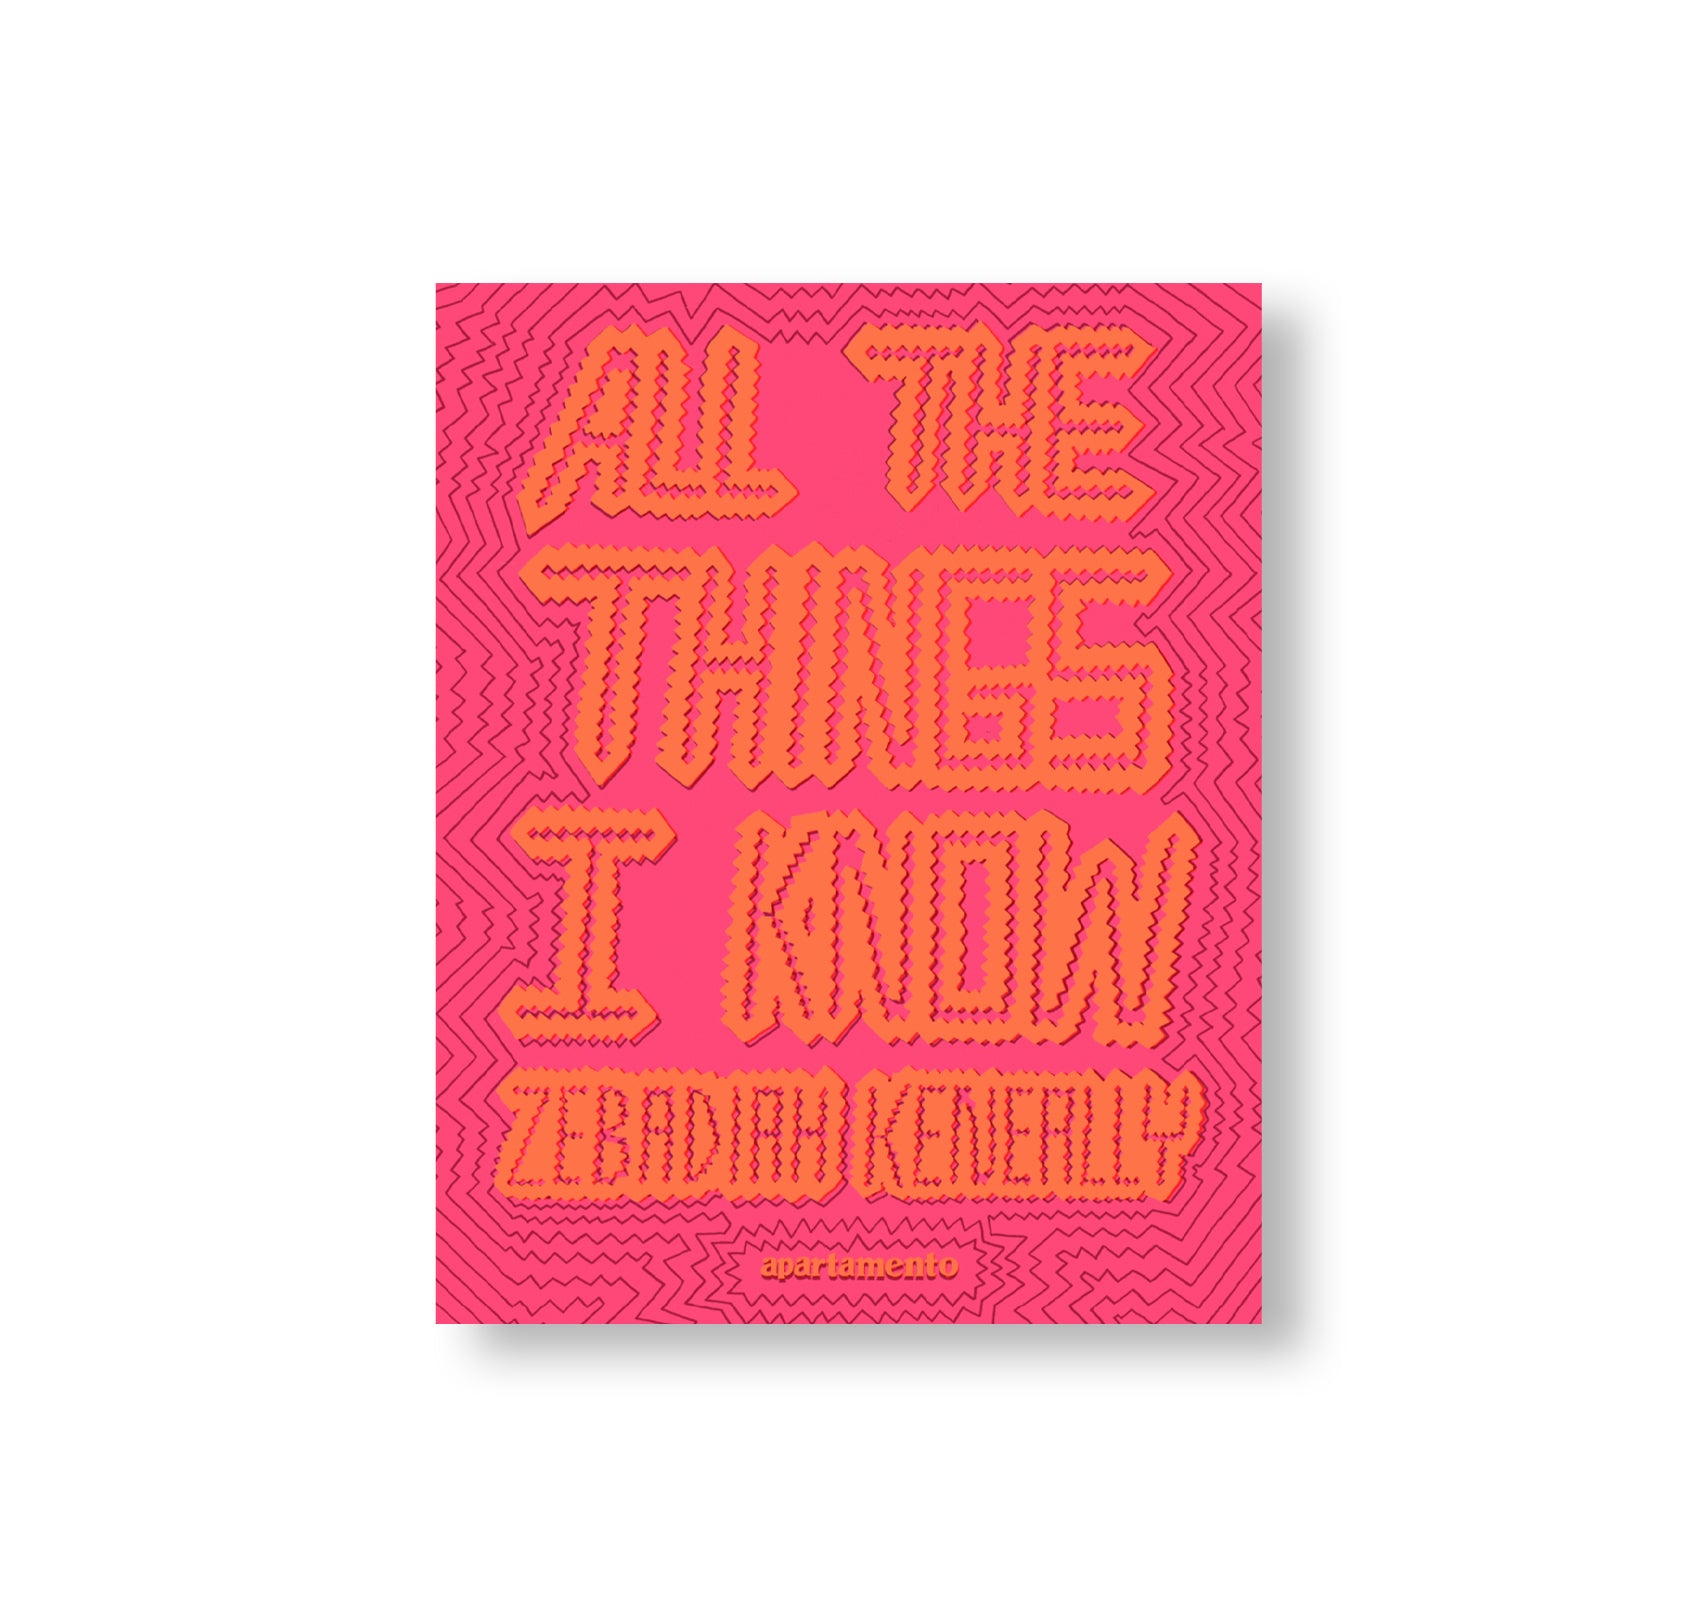 ALL THE THINGS I KNOW by Zebadiah Keneally